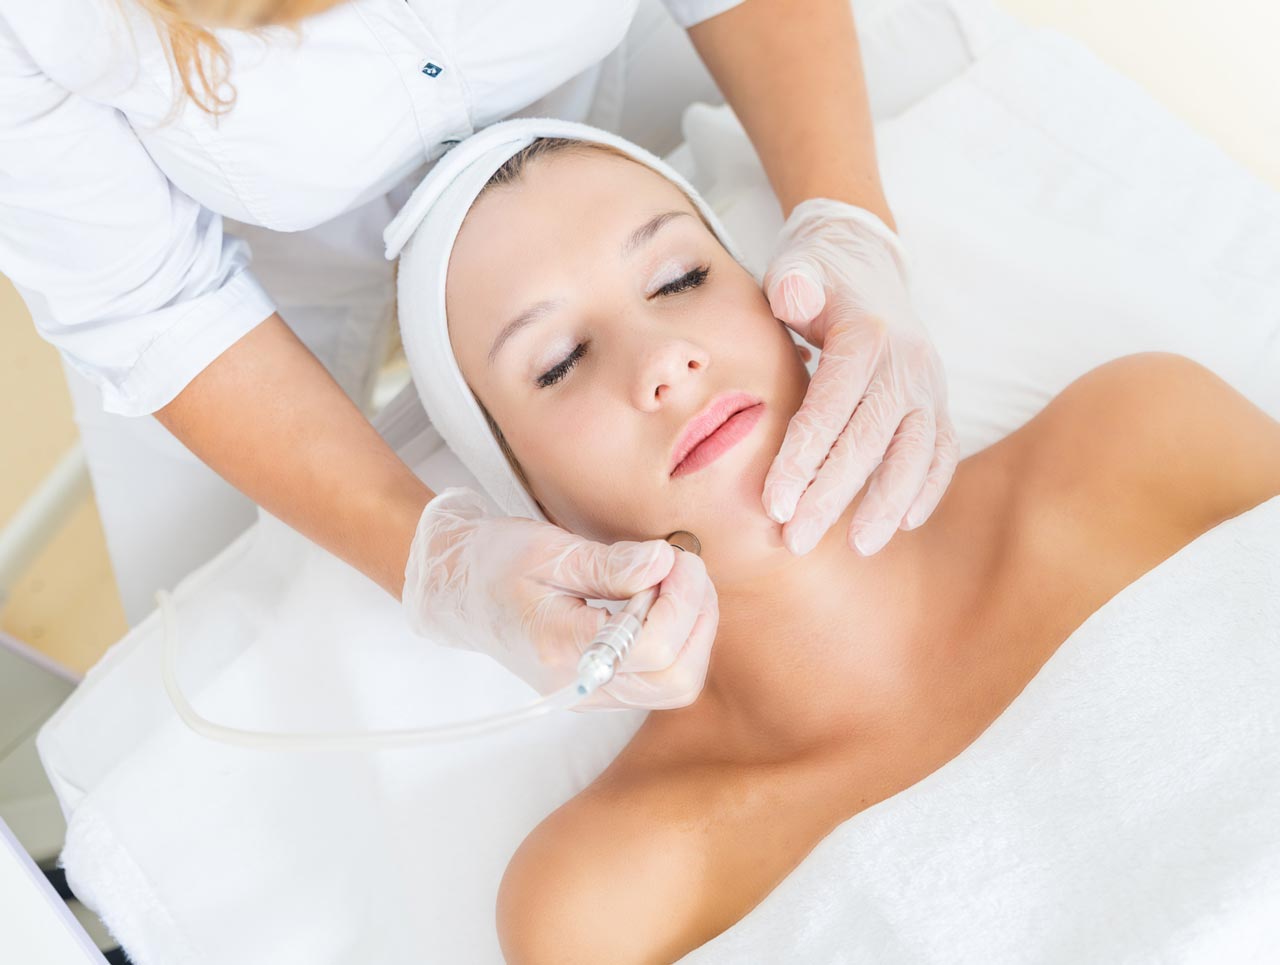 Does Microdermabrasion Get Rid of Peach Fuzz? - Skin Deep Med Spa